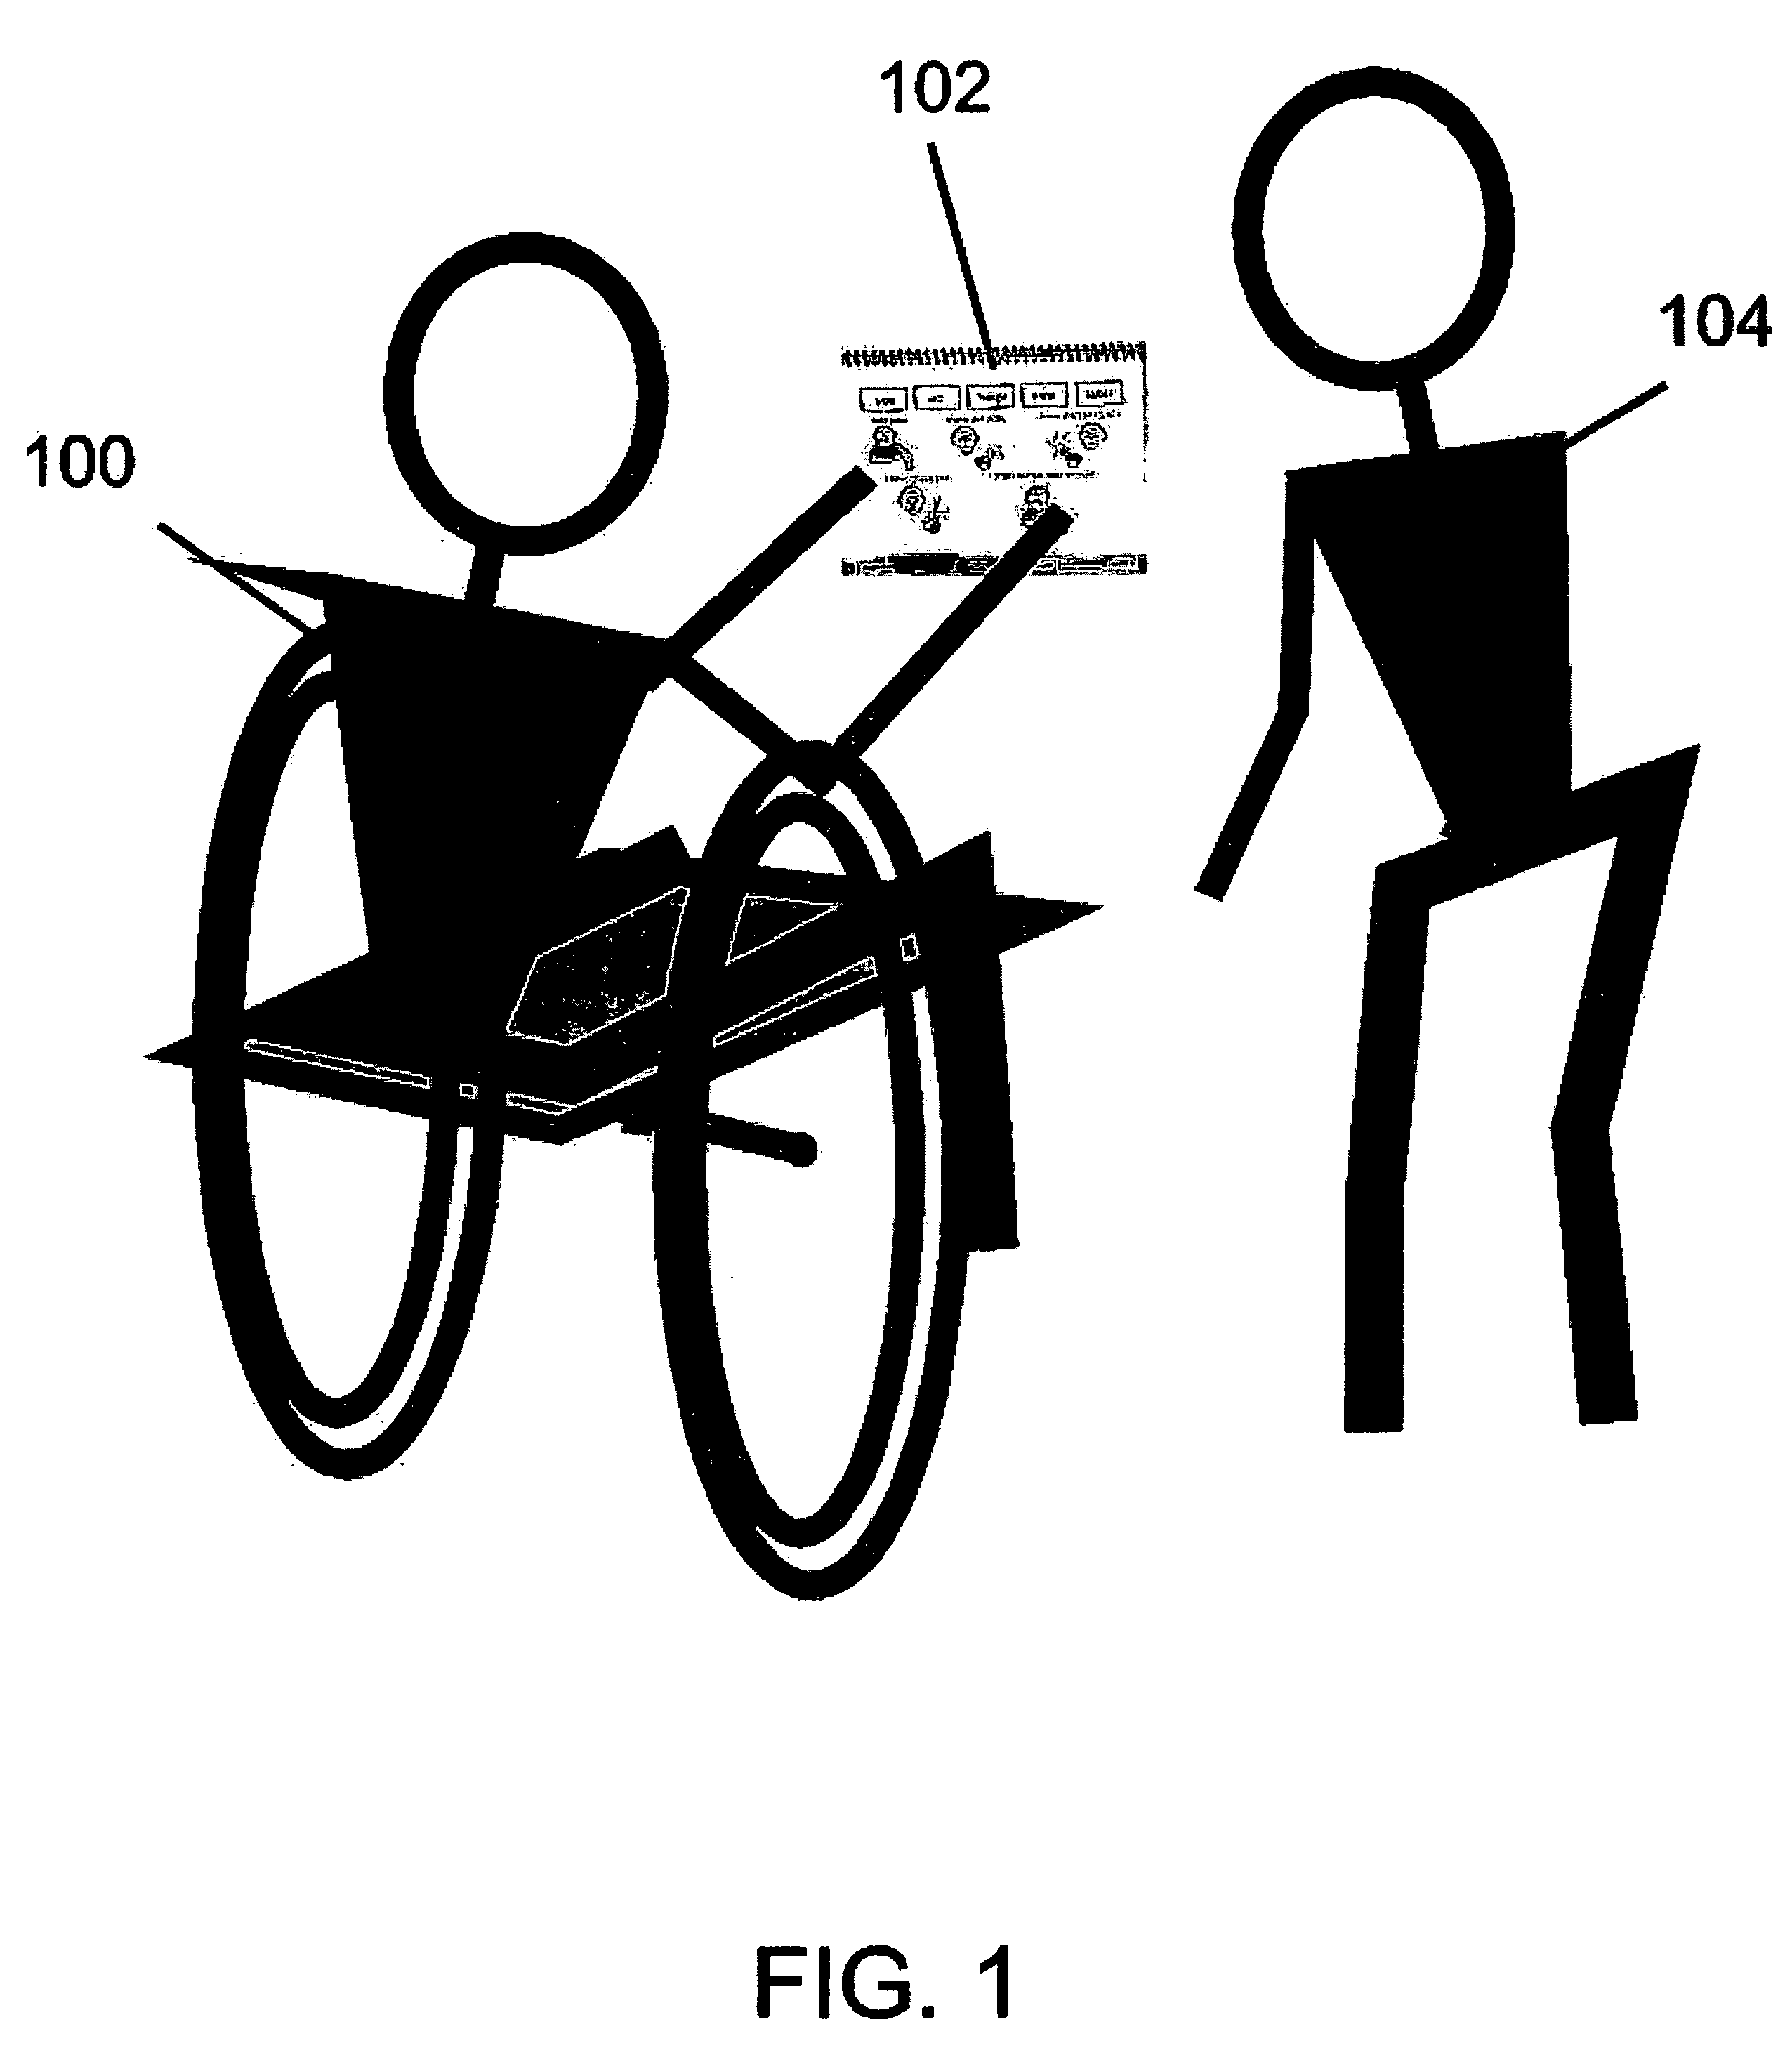 Apparatus for presenting a hierarchically and thematically arranged plurality of concisely annotated pictograms for facilitating communication without speech